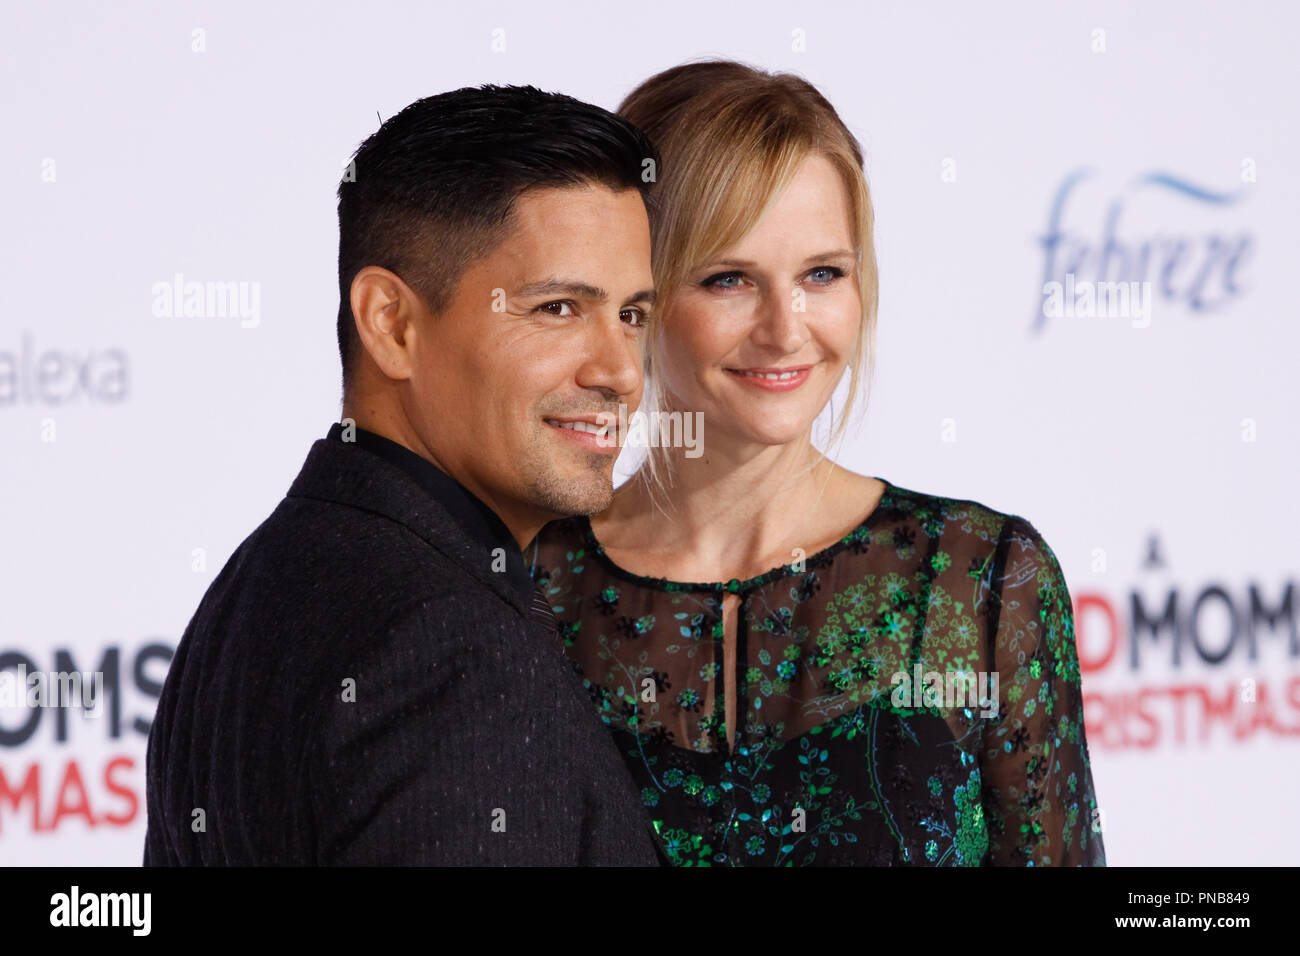 Jay Hernandez, Daniella Deutscher at the Premiere of STX Films' 'A Bad Moms Christmas' held at the Regency Village Theater in Westwood, CA, October 30, 2017. Photo by Joseph Martinez / PictureLux Stock Photo